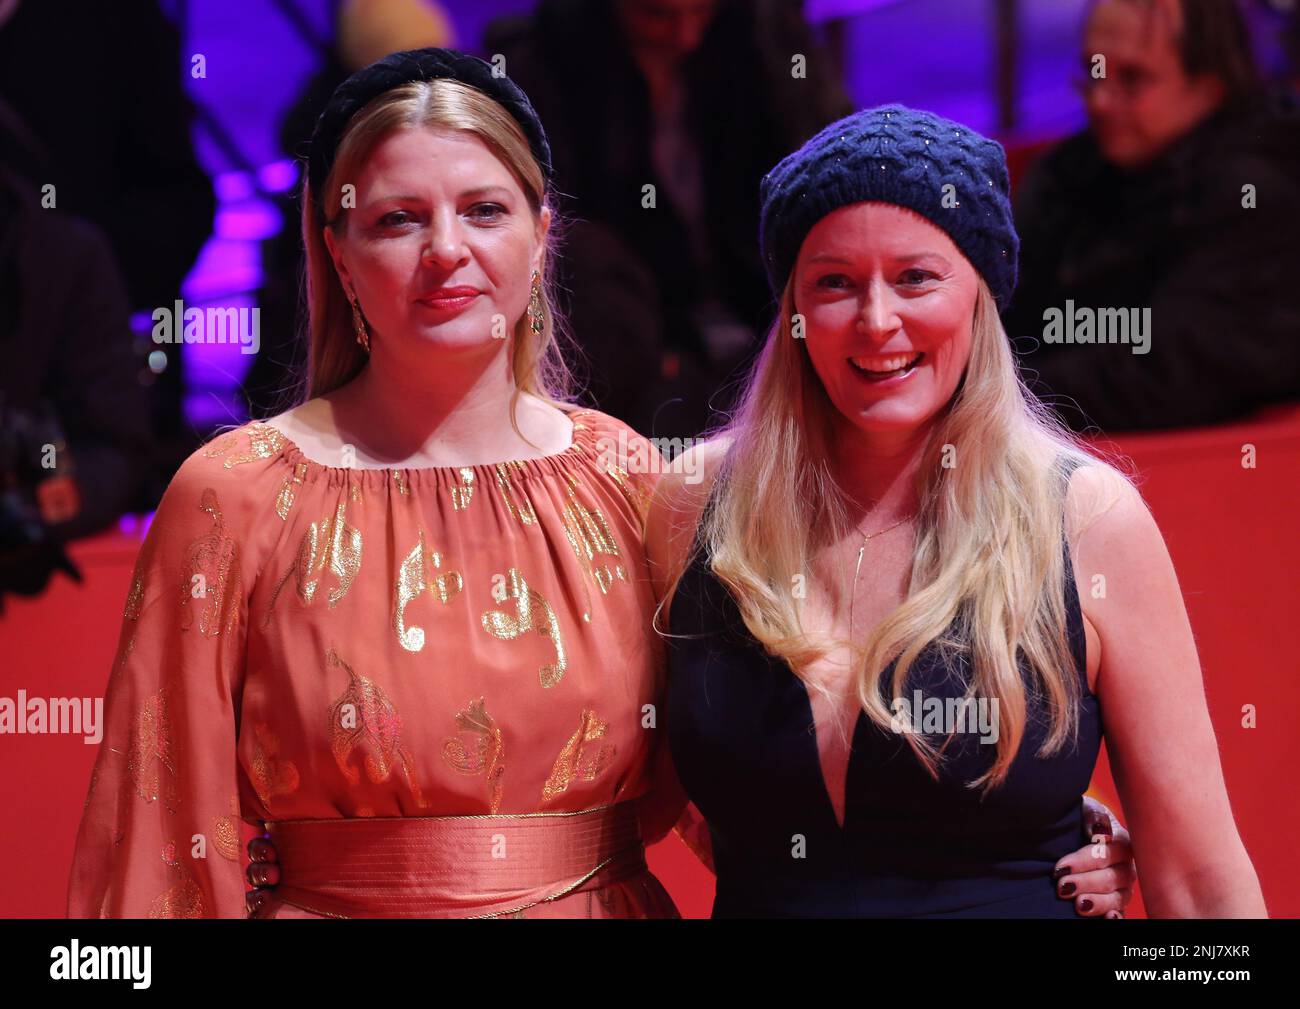 Berlin, Germany. 17th February 2023. Jördis Triebel and Silke Bodenbender at the premiere gala screening for the film Someday We’ll Tell Each Other Everything (Irgendwann Werden Wir Uns Alles Erzählen) at the 73rd Berlinale International Film Festival, Berlinale Palast. Credit: Doreen Kennedy/Alamy Live News. Stock Photo